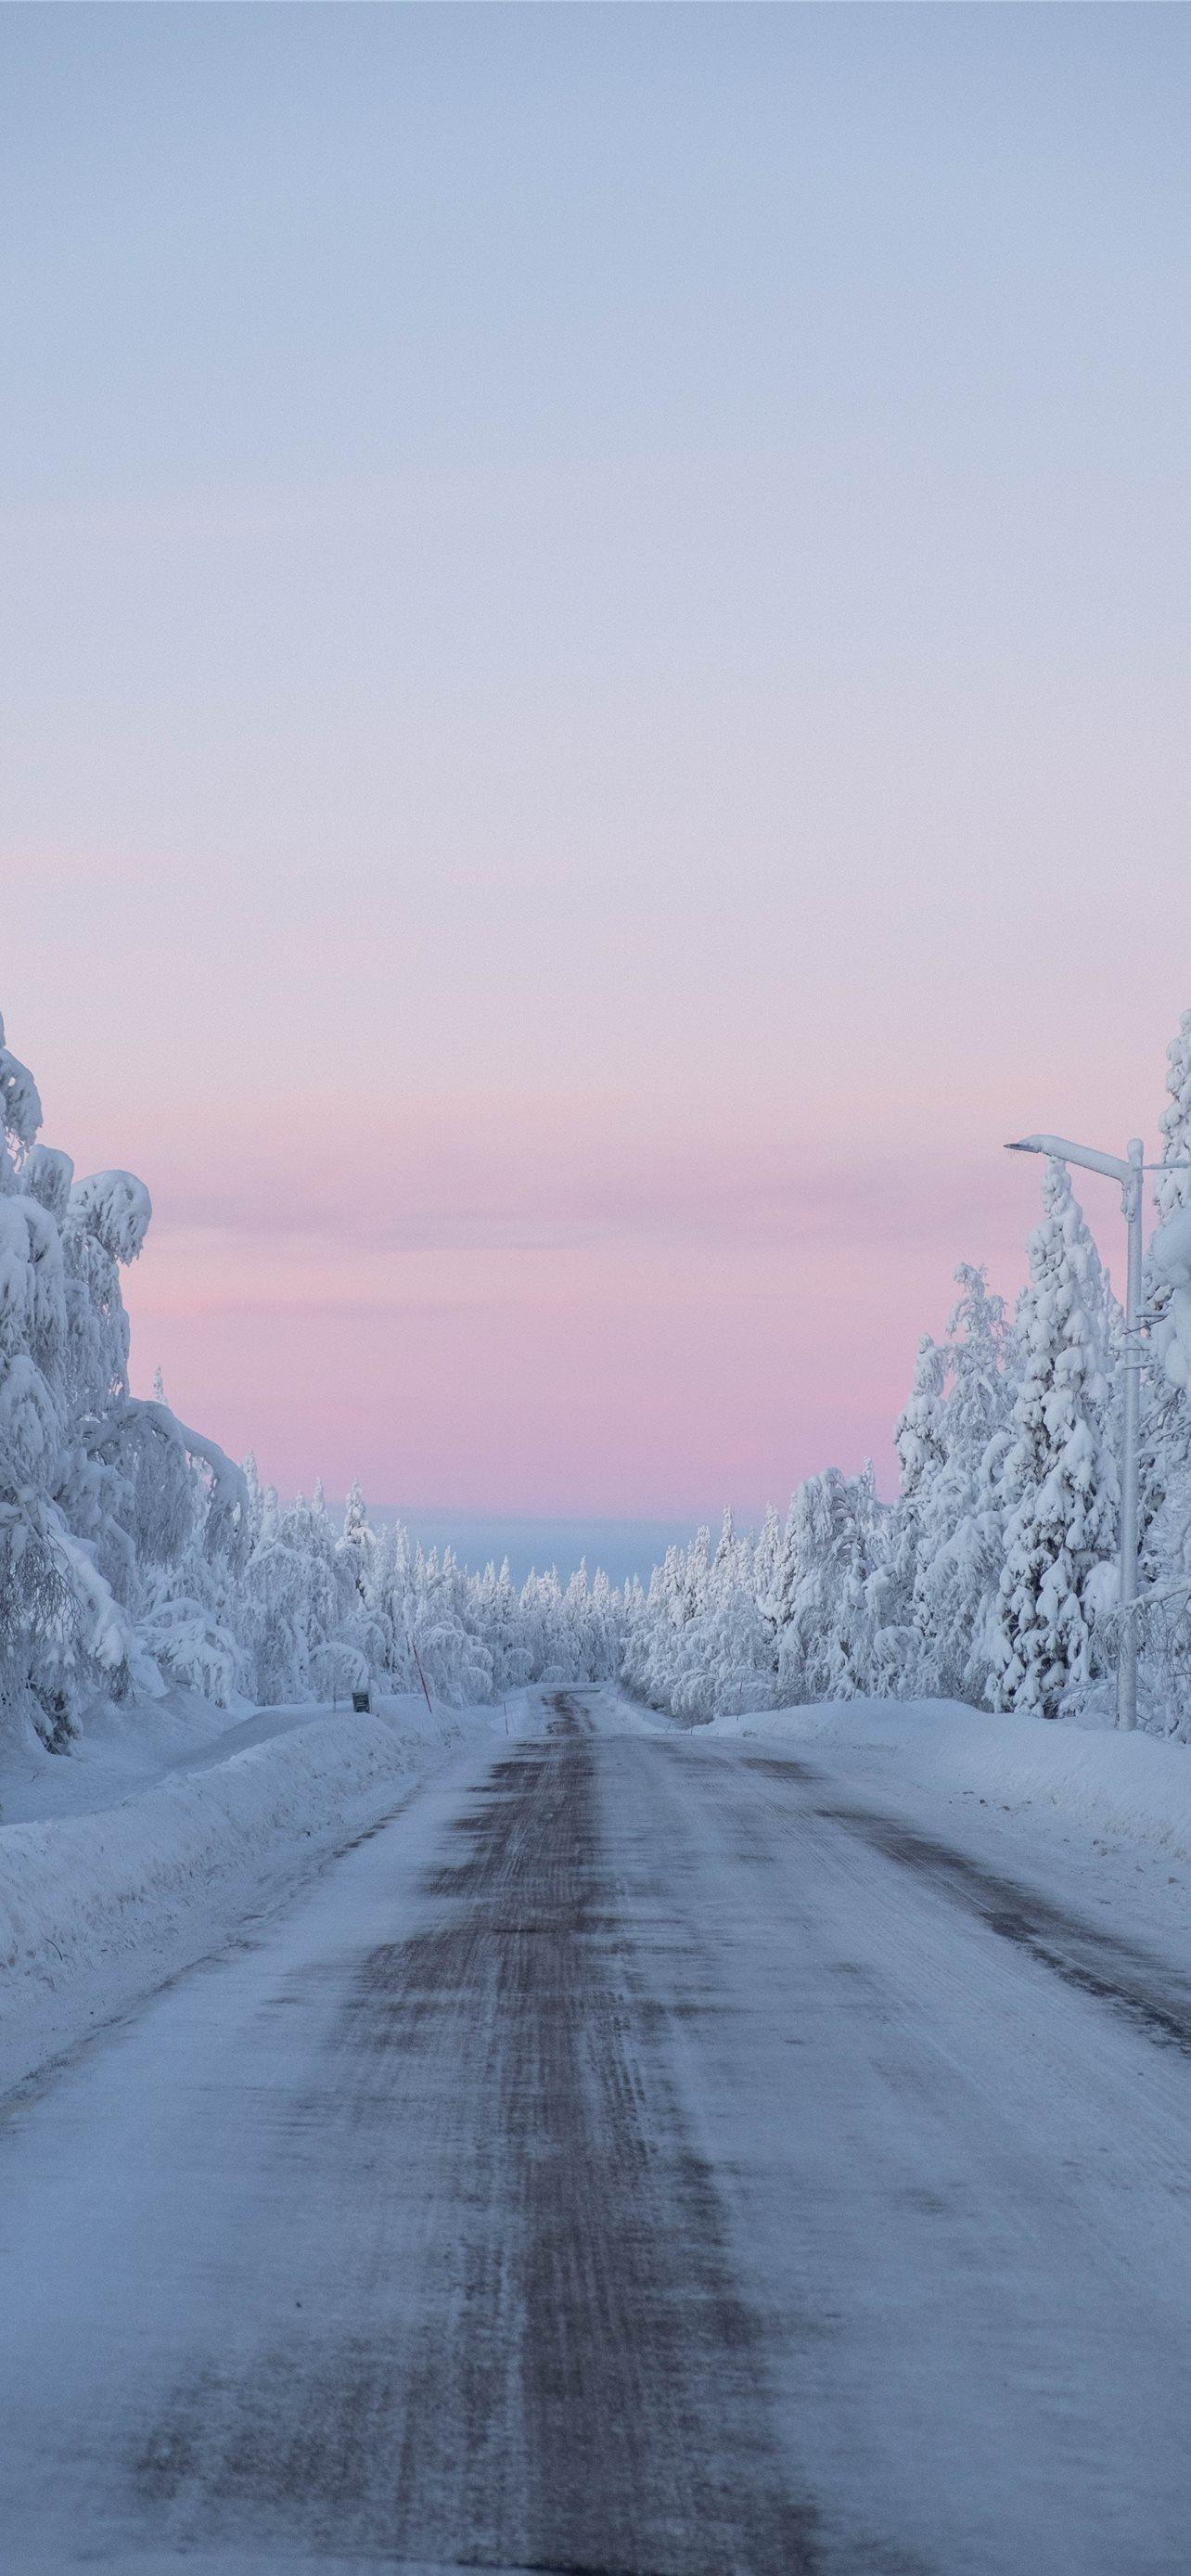 Snow Covered Trees And Road During Daytime iPhone Wallpaper